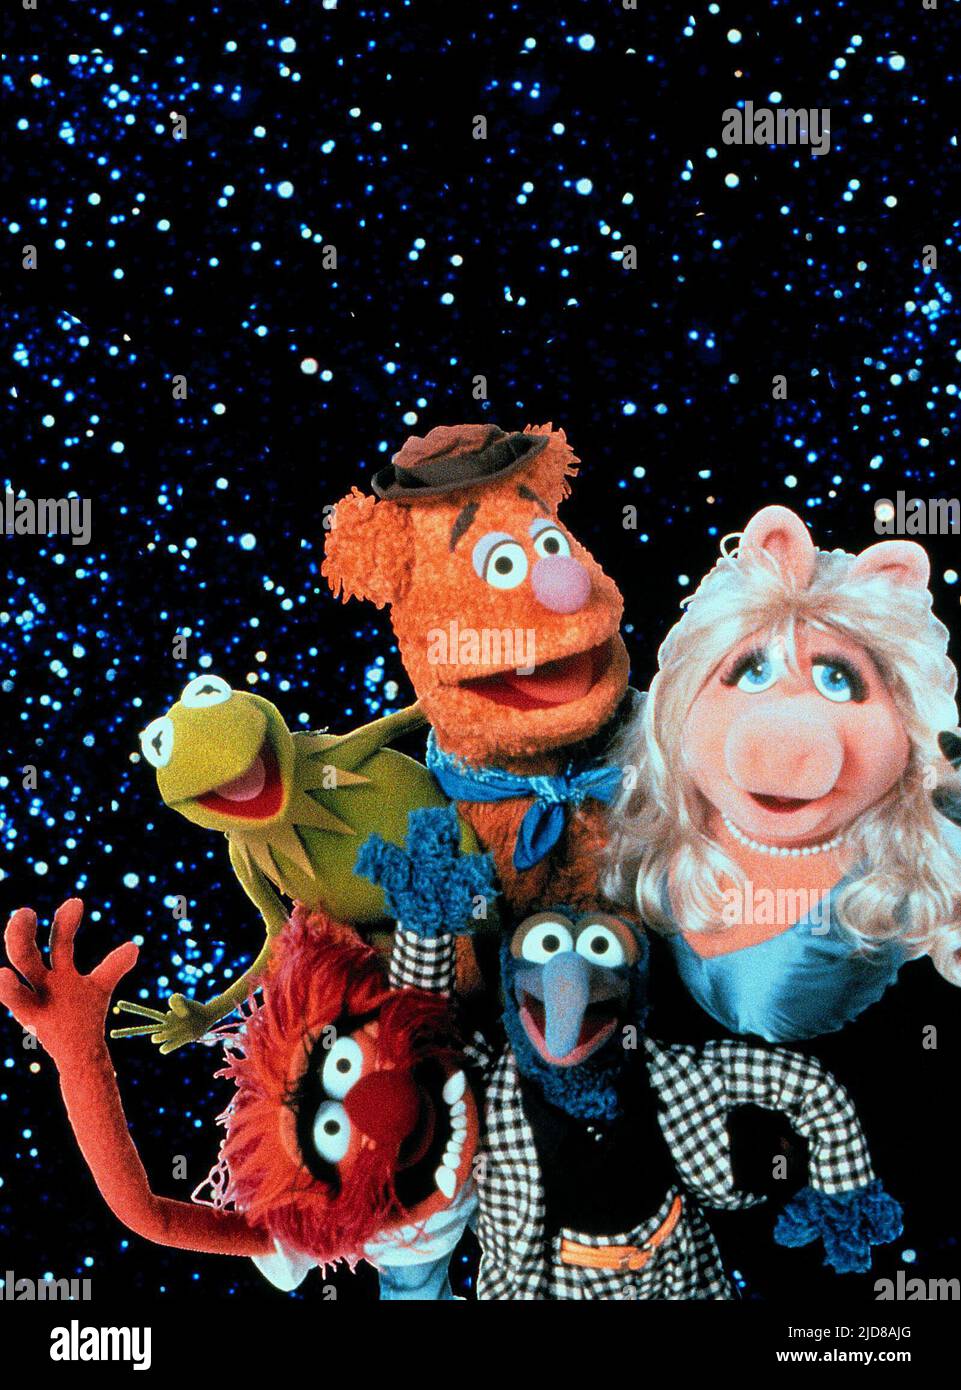 KERMIT,FOZZIE,PIGGY,ANIMAL, MUPPETS FROM SPACE, 1999 Banque D'Images